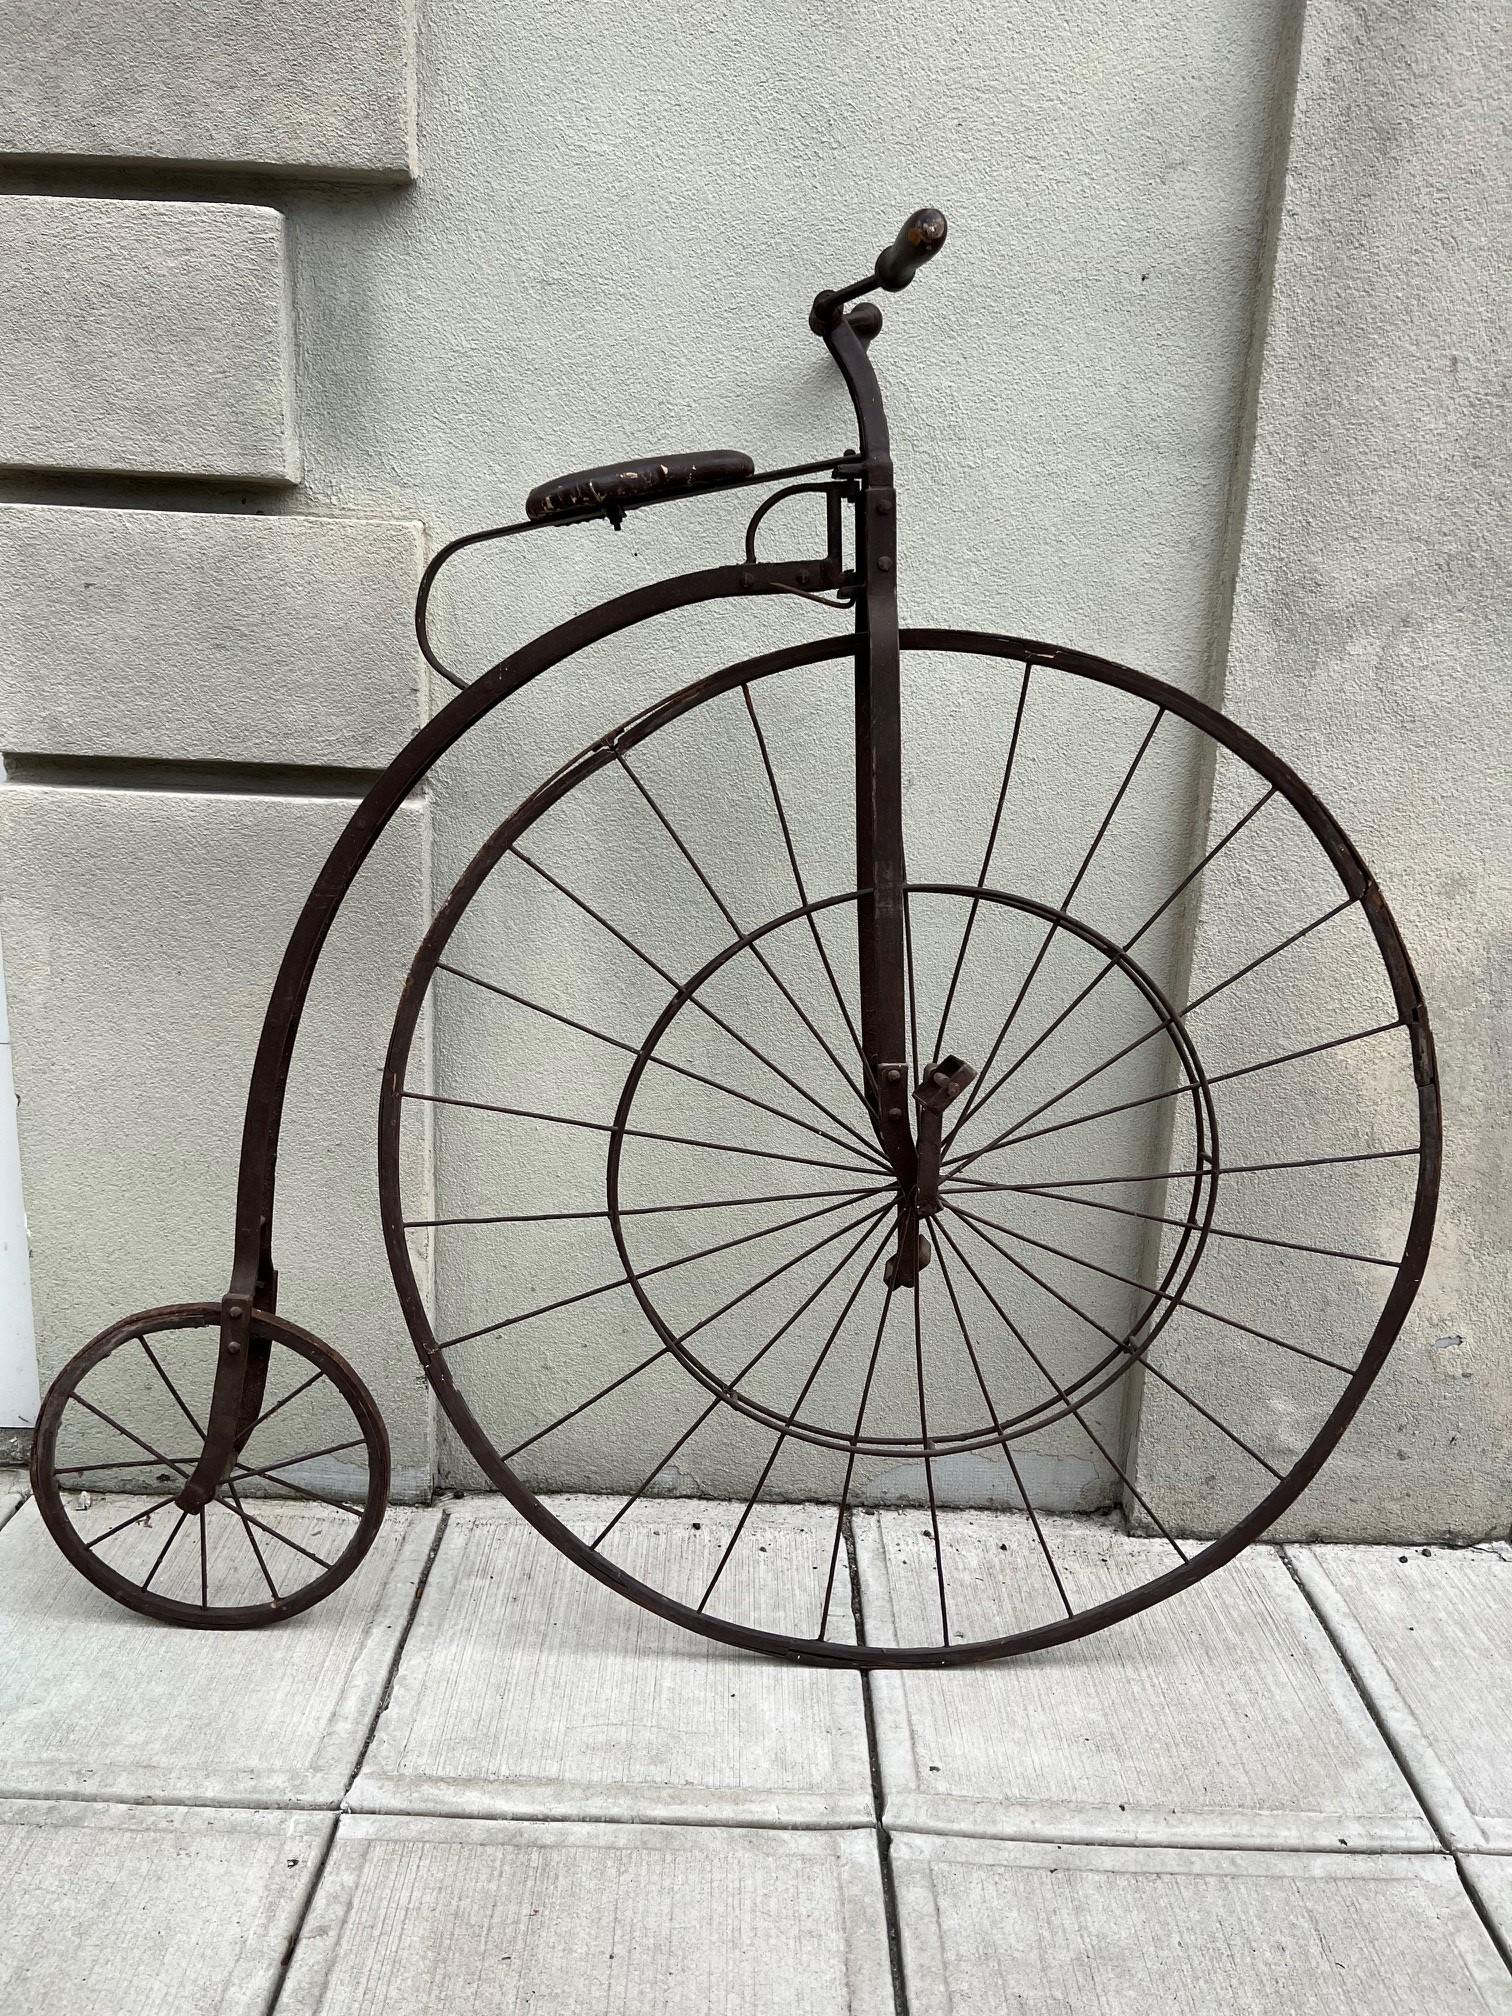 Fabulous high wheeler bicycle, I believe from the Early 20th century circa 1920s. It seems to be a size smaller than a Penny Farthing and larger than a child high wheeler. Sorry I wish I had more information, I purchased it from a small estate in